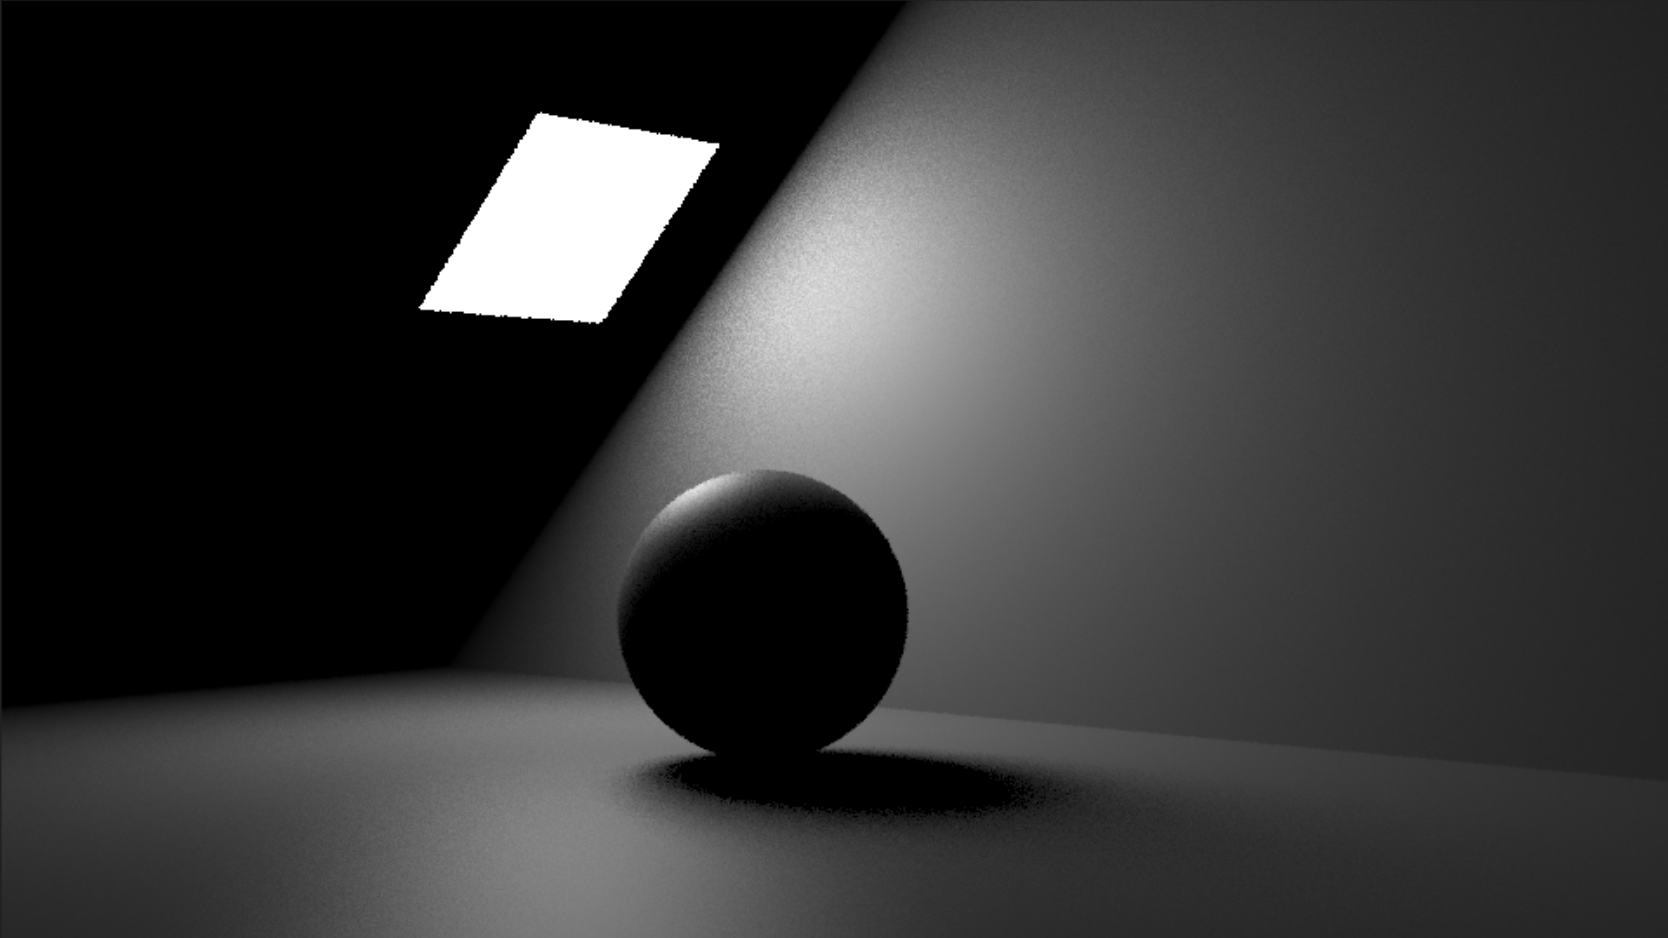 Normalized Off Small Light